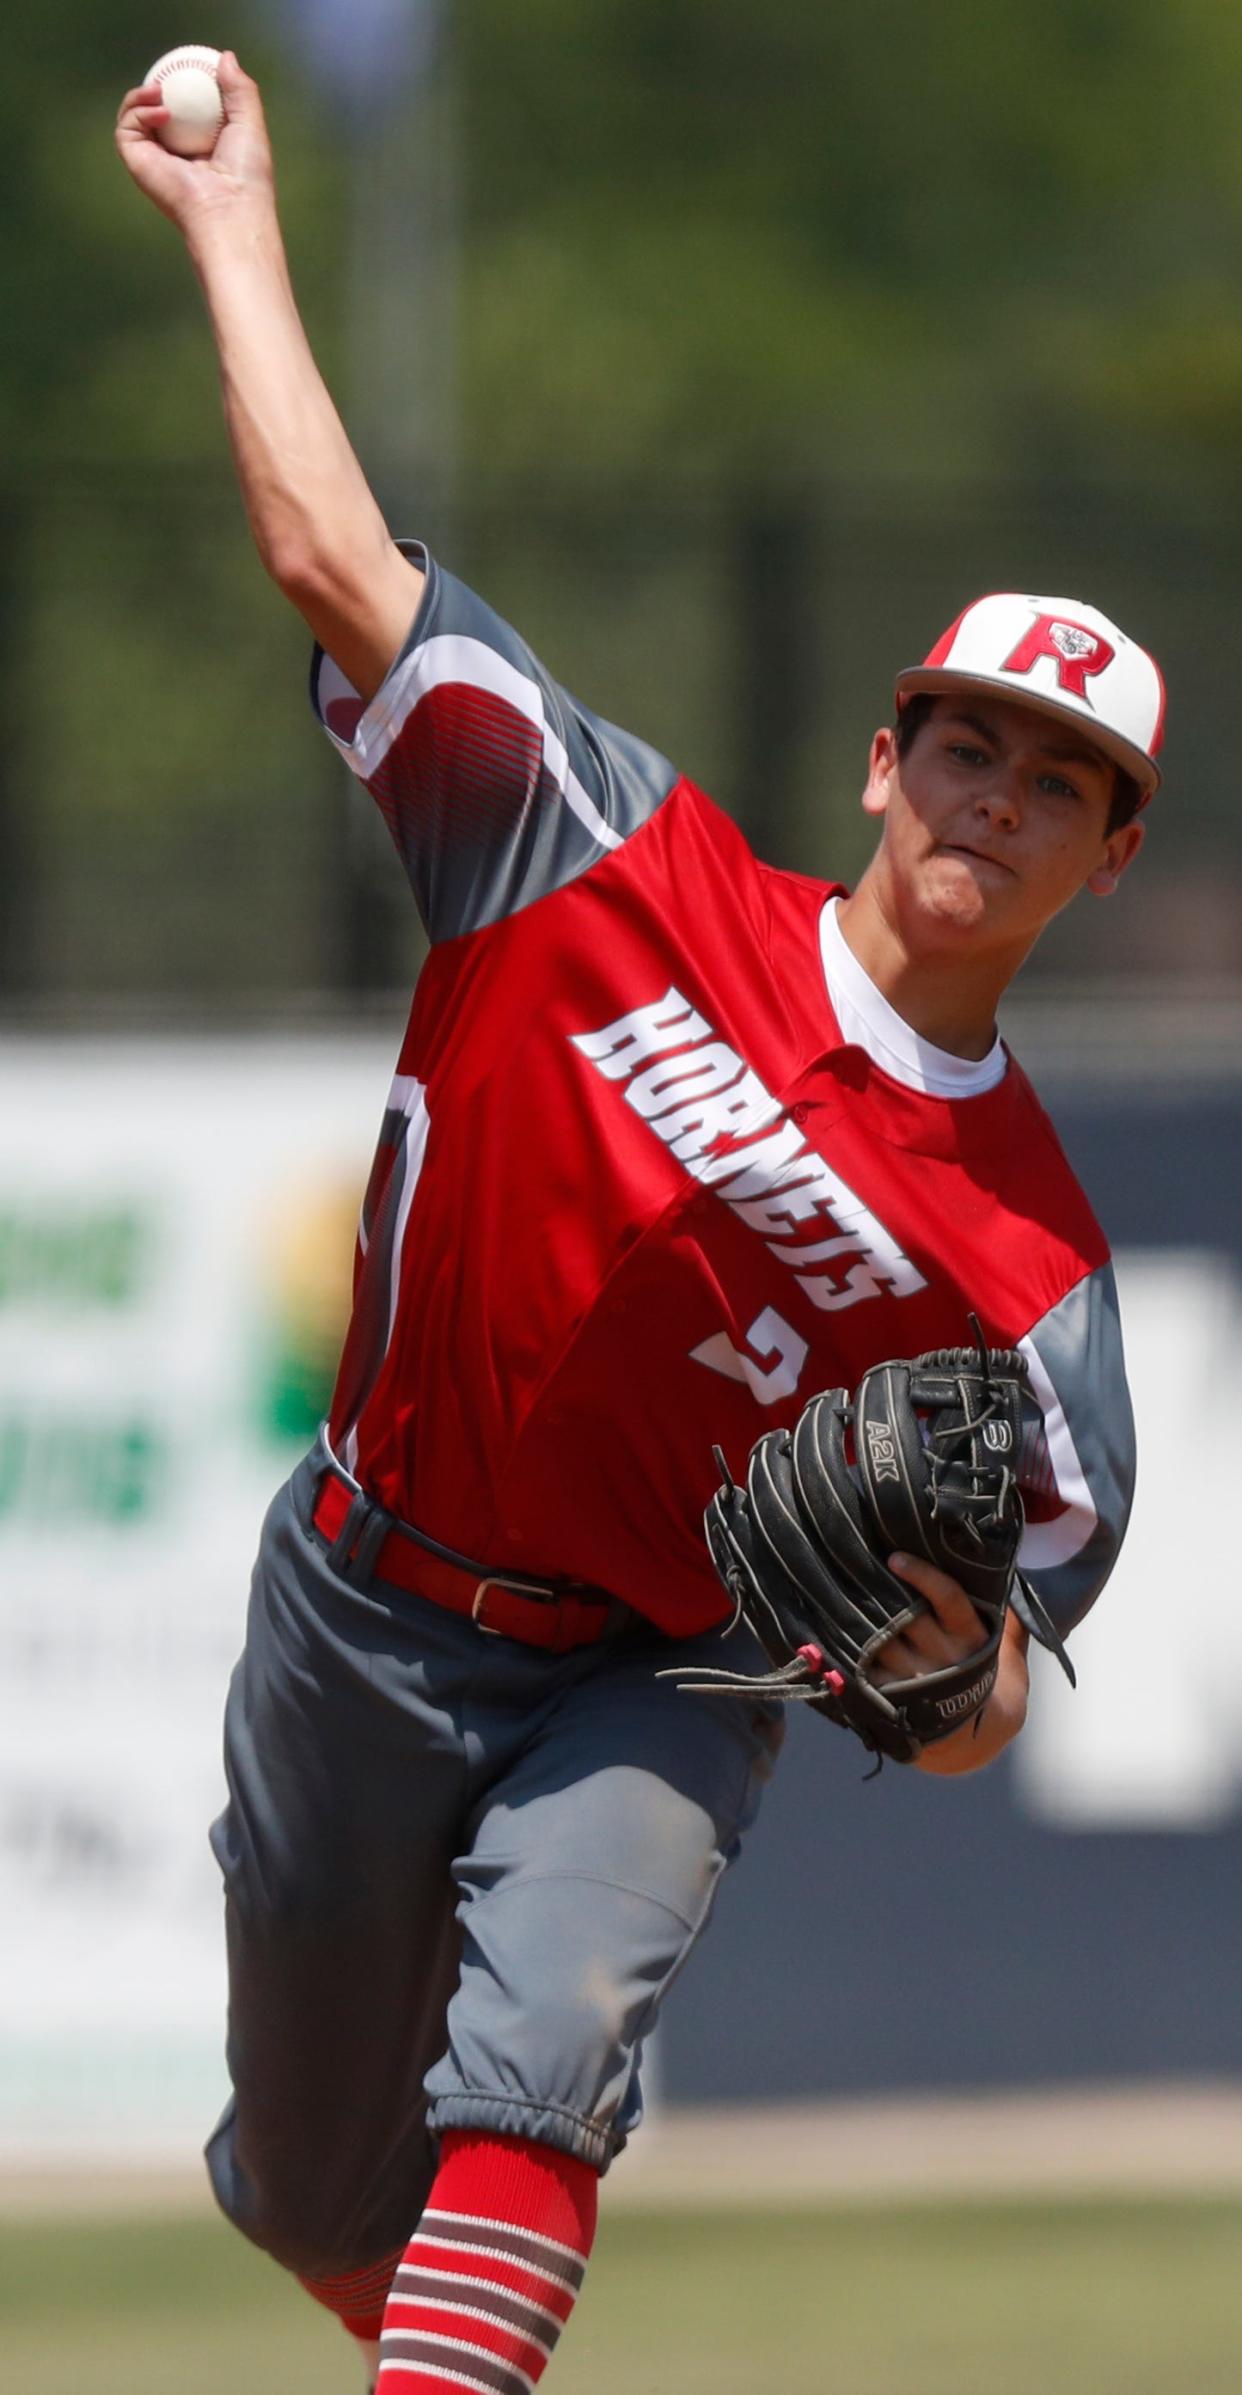 Rossville Hornets Zac Wainscott (2) pitches during the IHSAA baseball regional game against the Central Catholic Knights, Saturday, June 3, 2023, at Central Catholic High School in Lafayette, Ind. Central Catholic won 9-0.